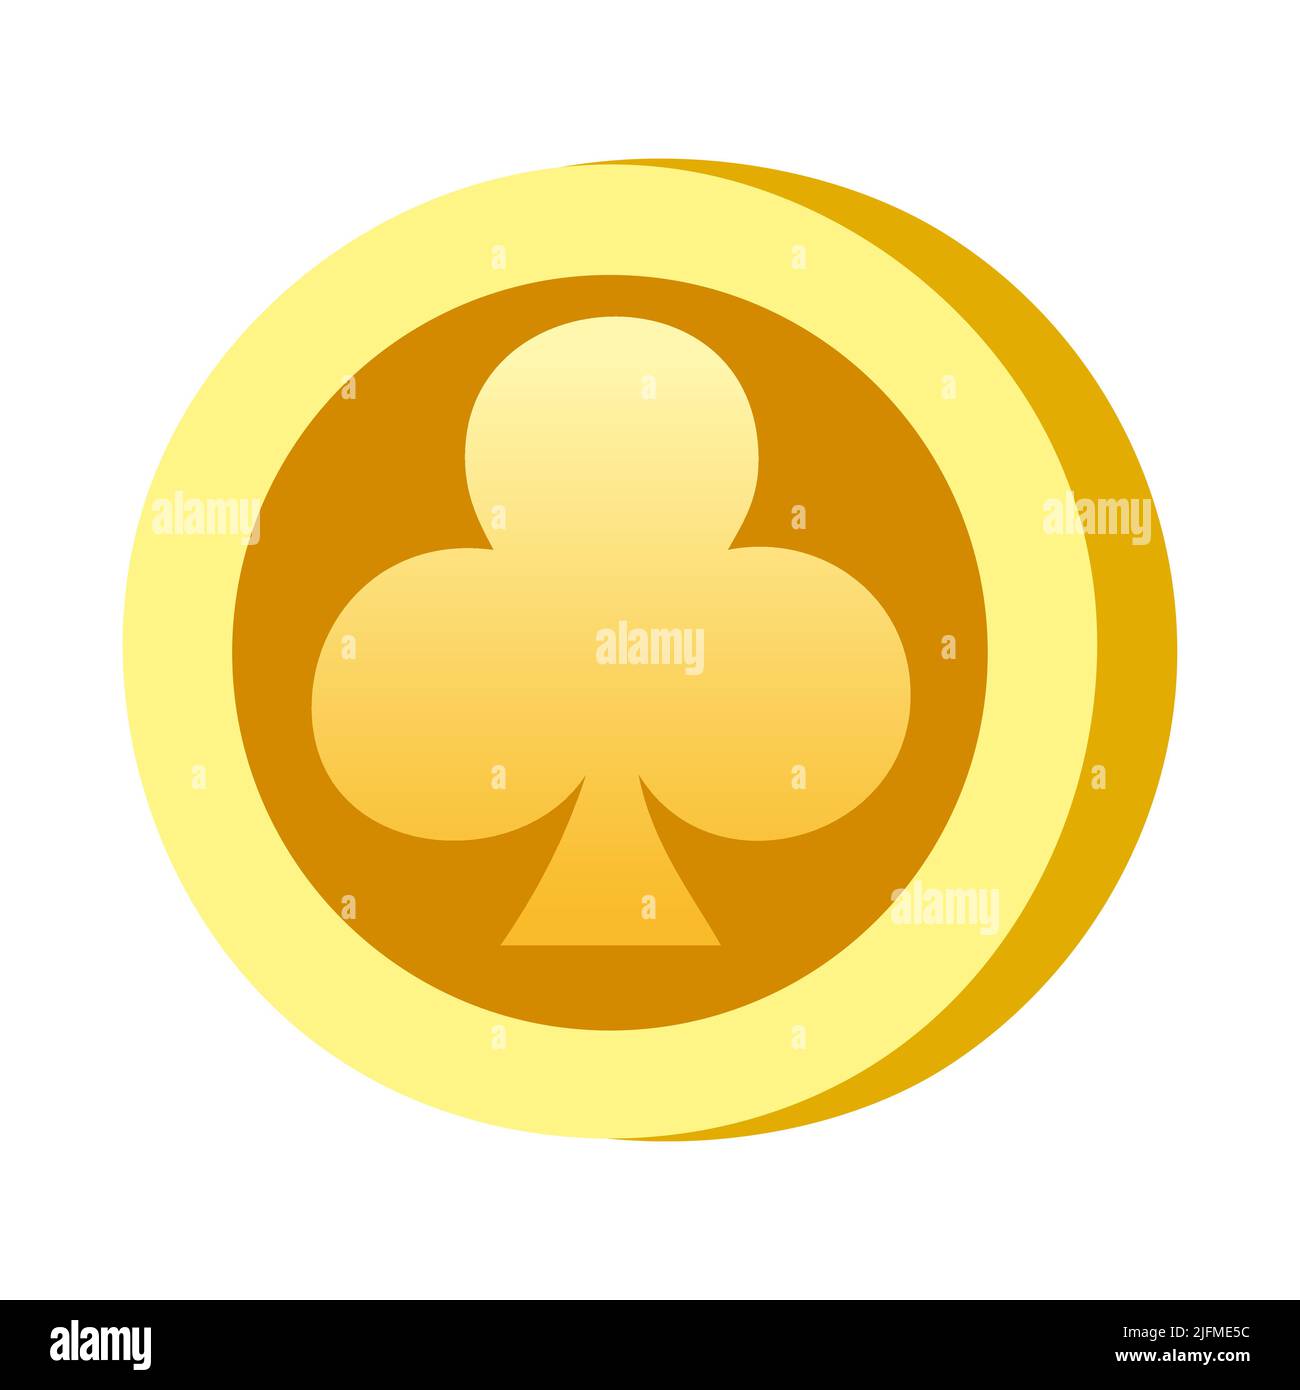 Icon Clubs shape. Gambling symbol, object. Vector illustration Stock Vector